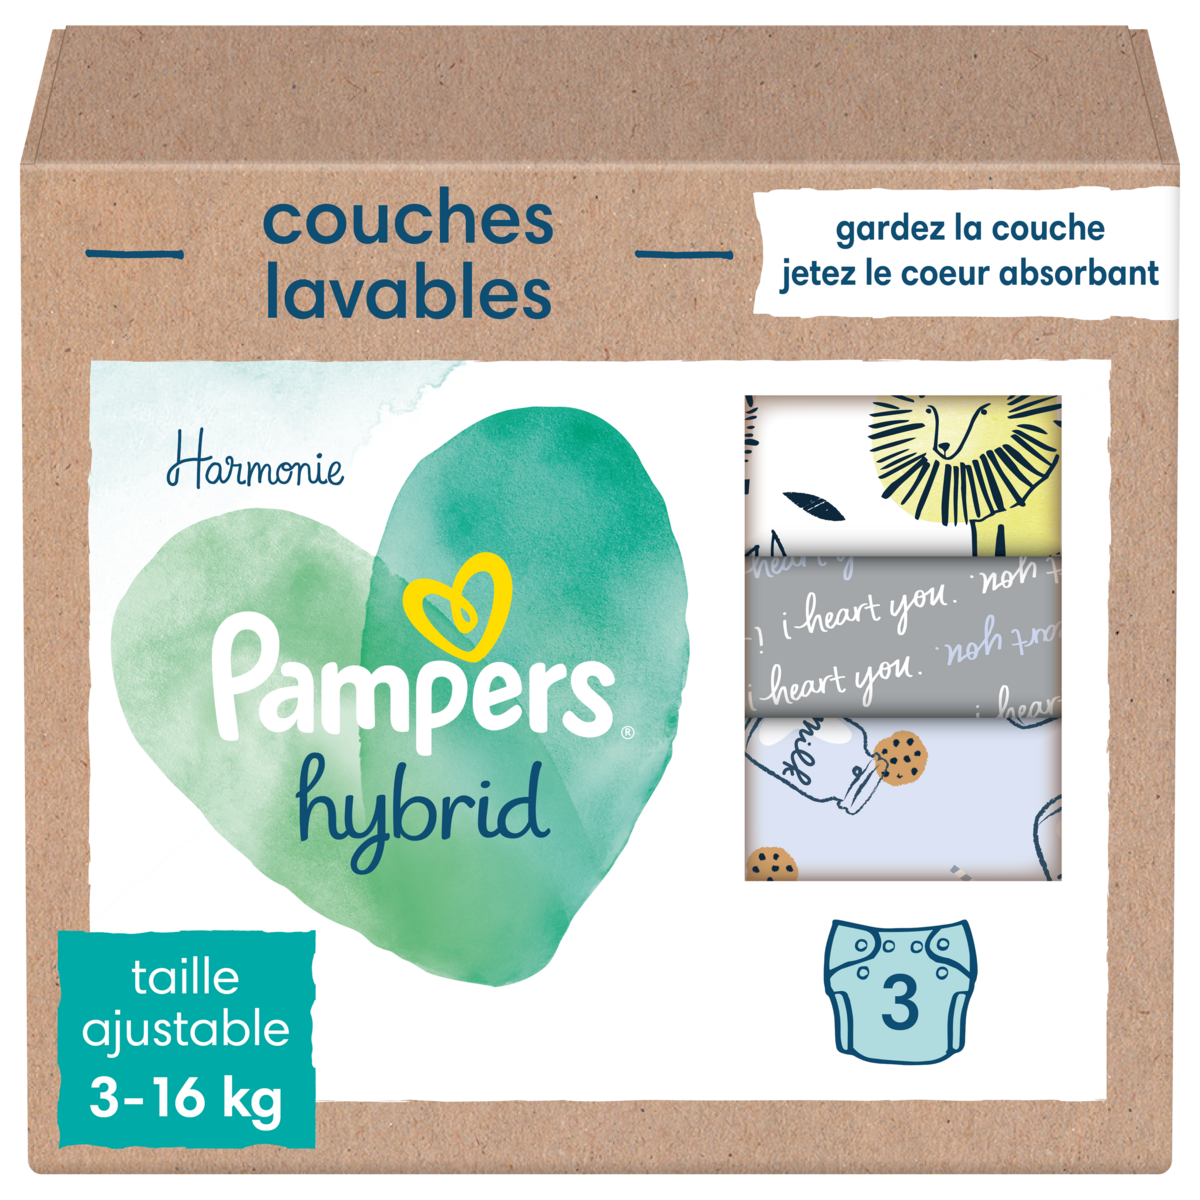 PAMPERS Hybrid couches lavables (3-16kg) 3 couches